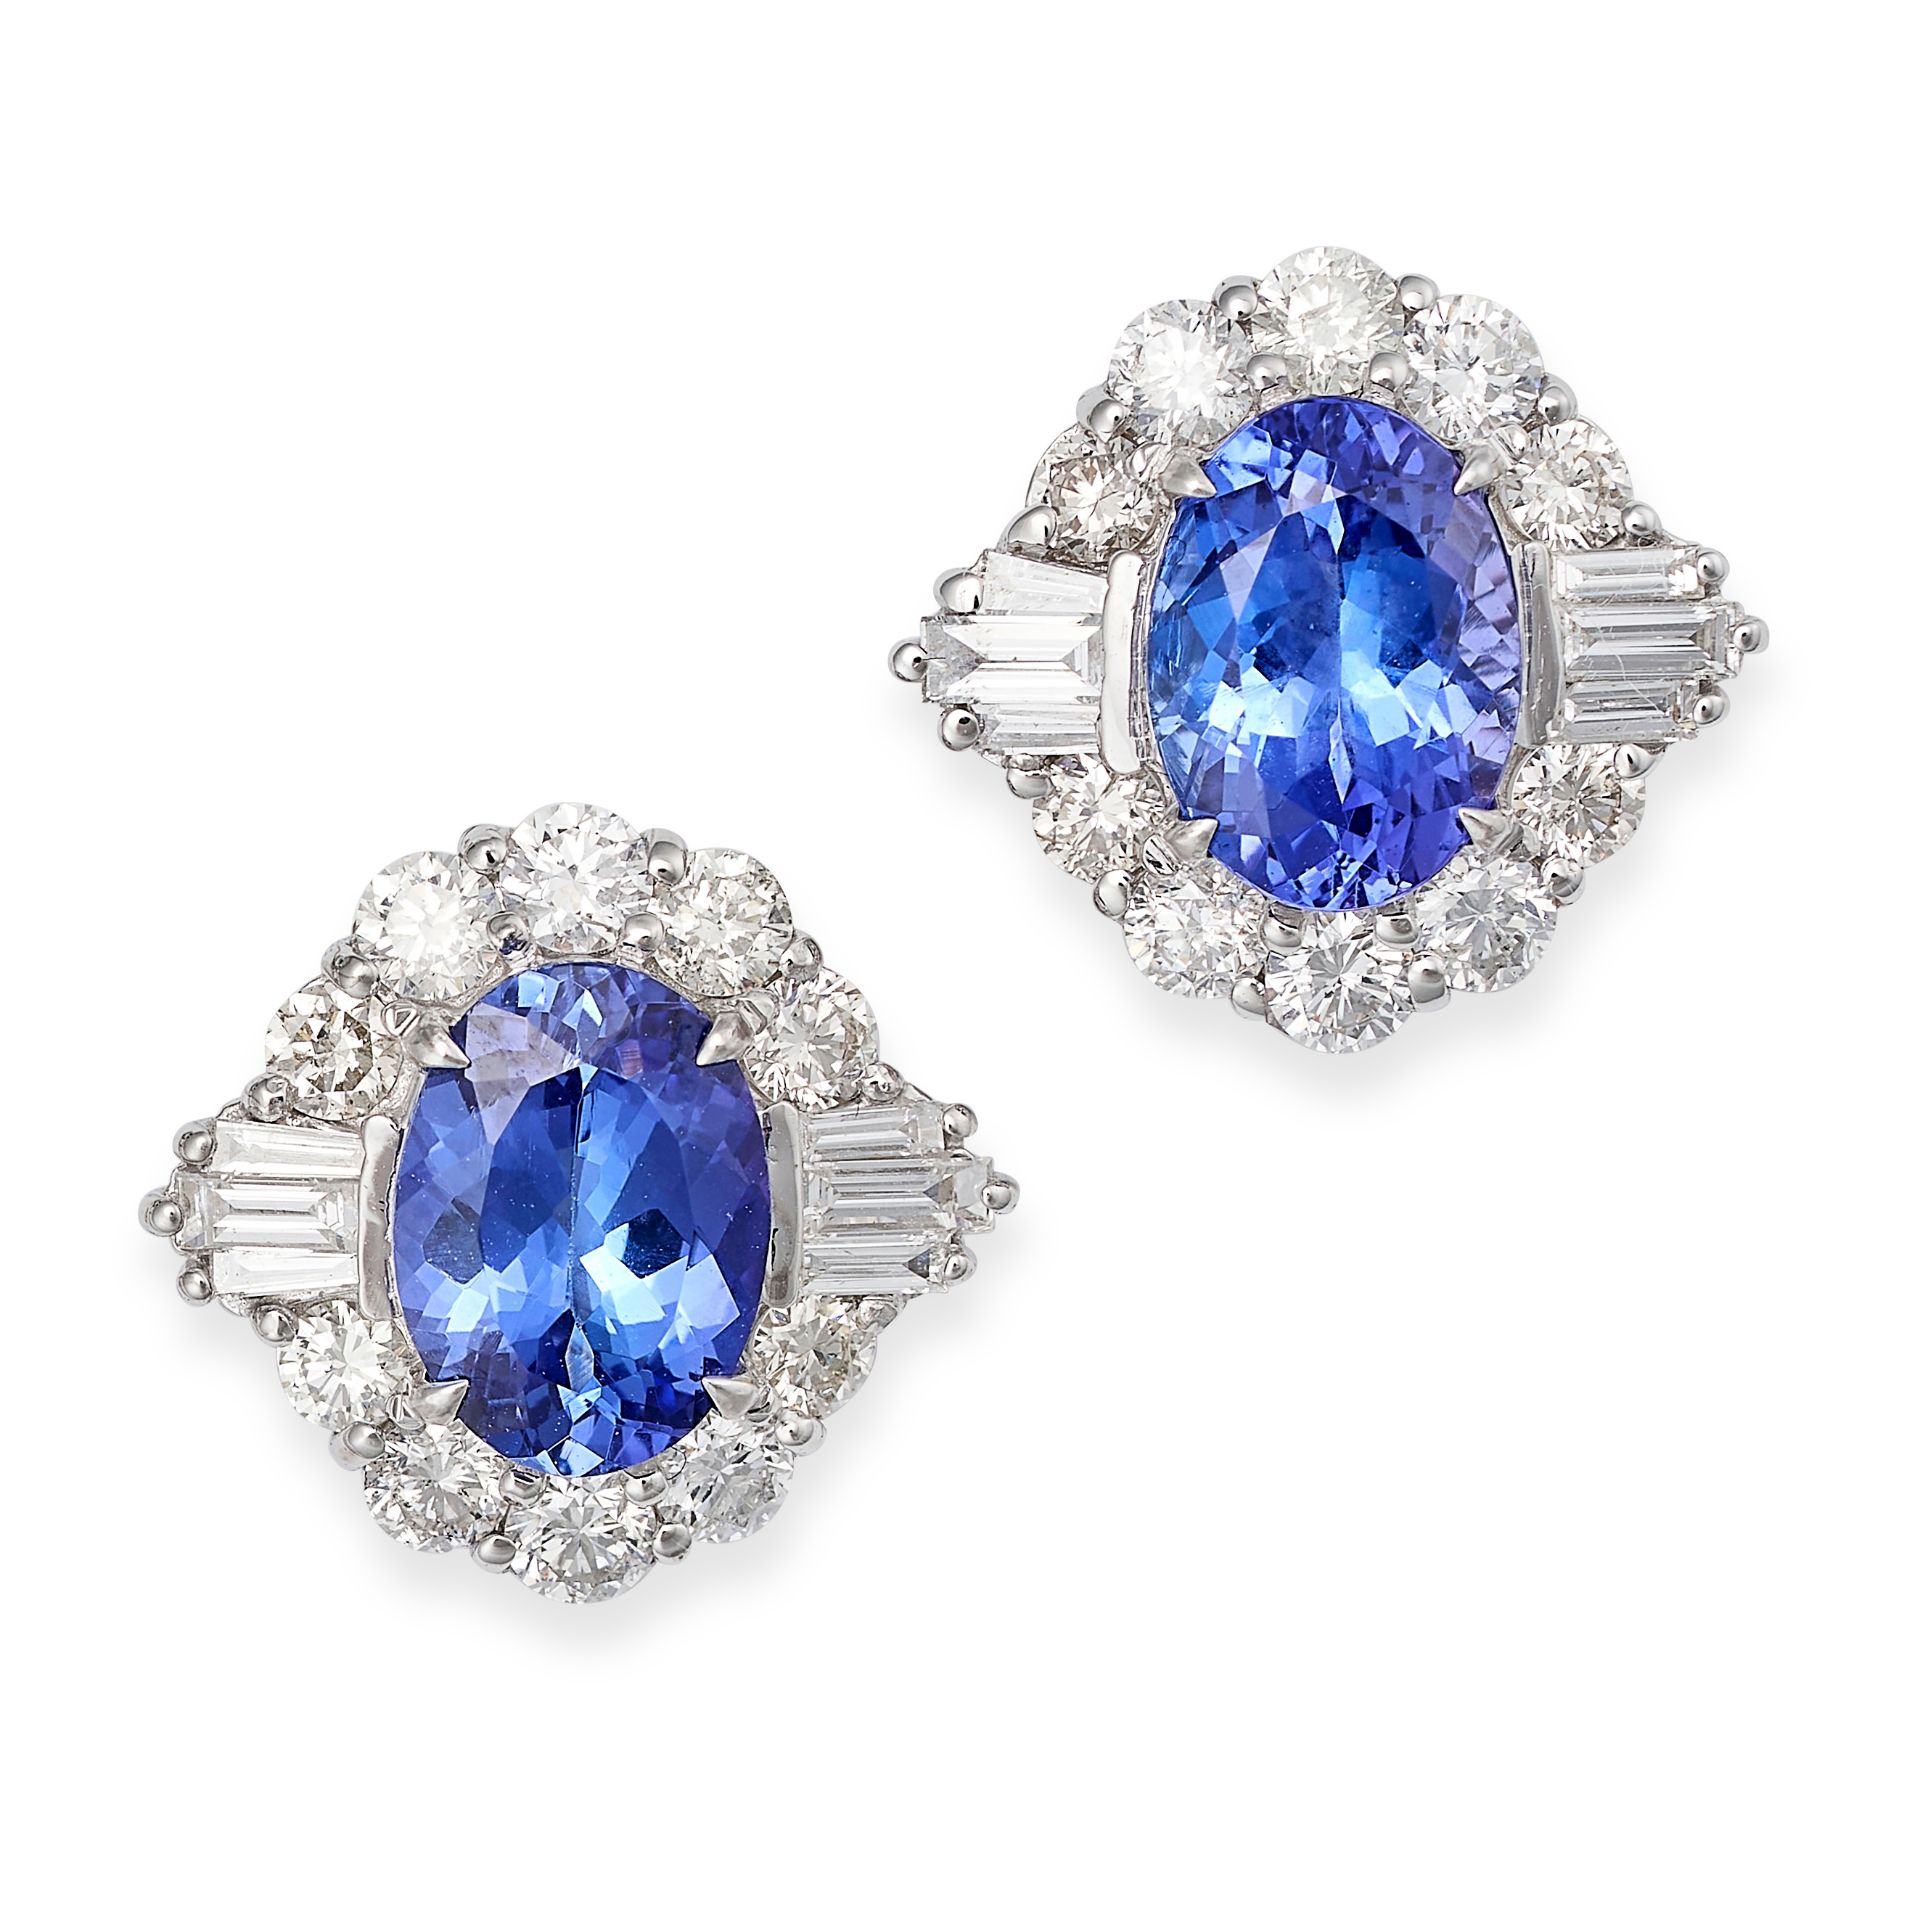 A PAIR OF TANZANITE AND DIAMOND STUD EARRINGS in 18ct white gold, each set with an oval cut tanza...